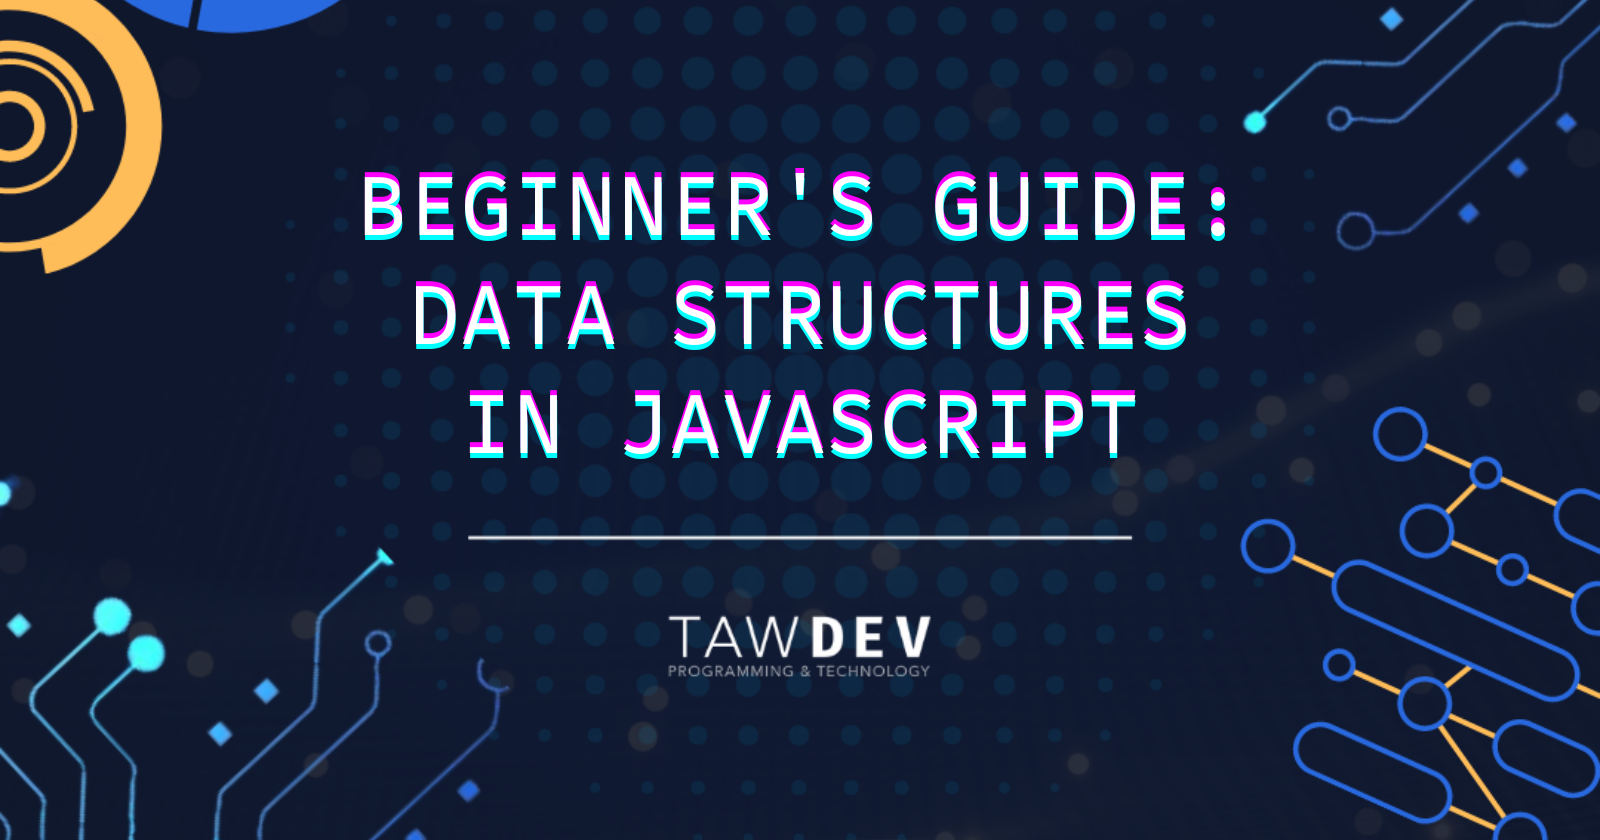 Beginner's Guide to Data Structures in JavaScript